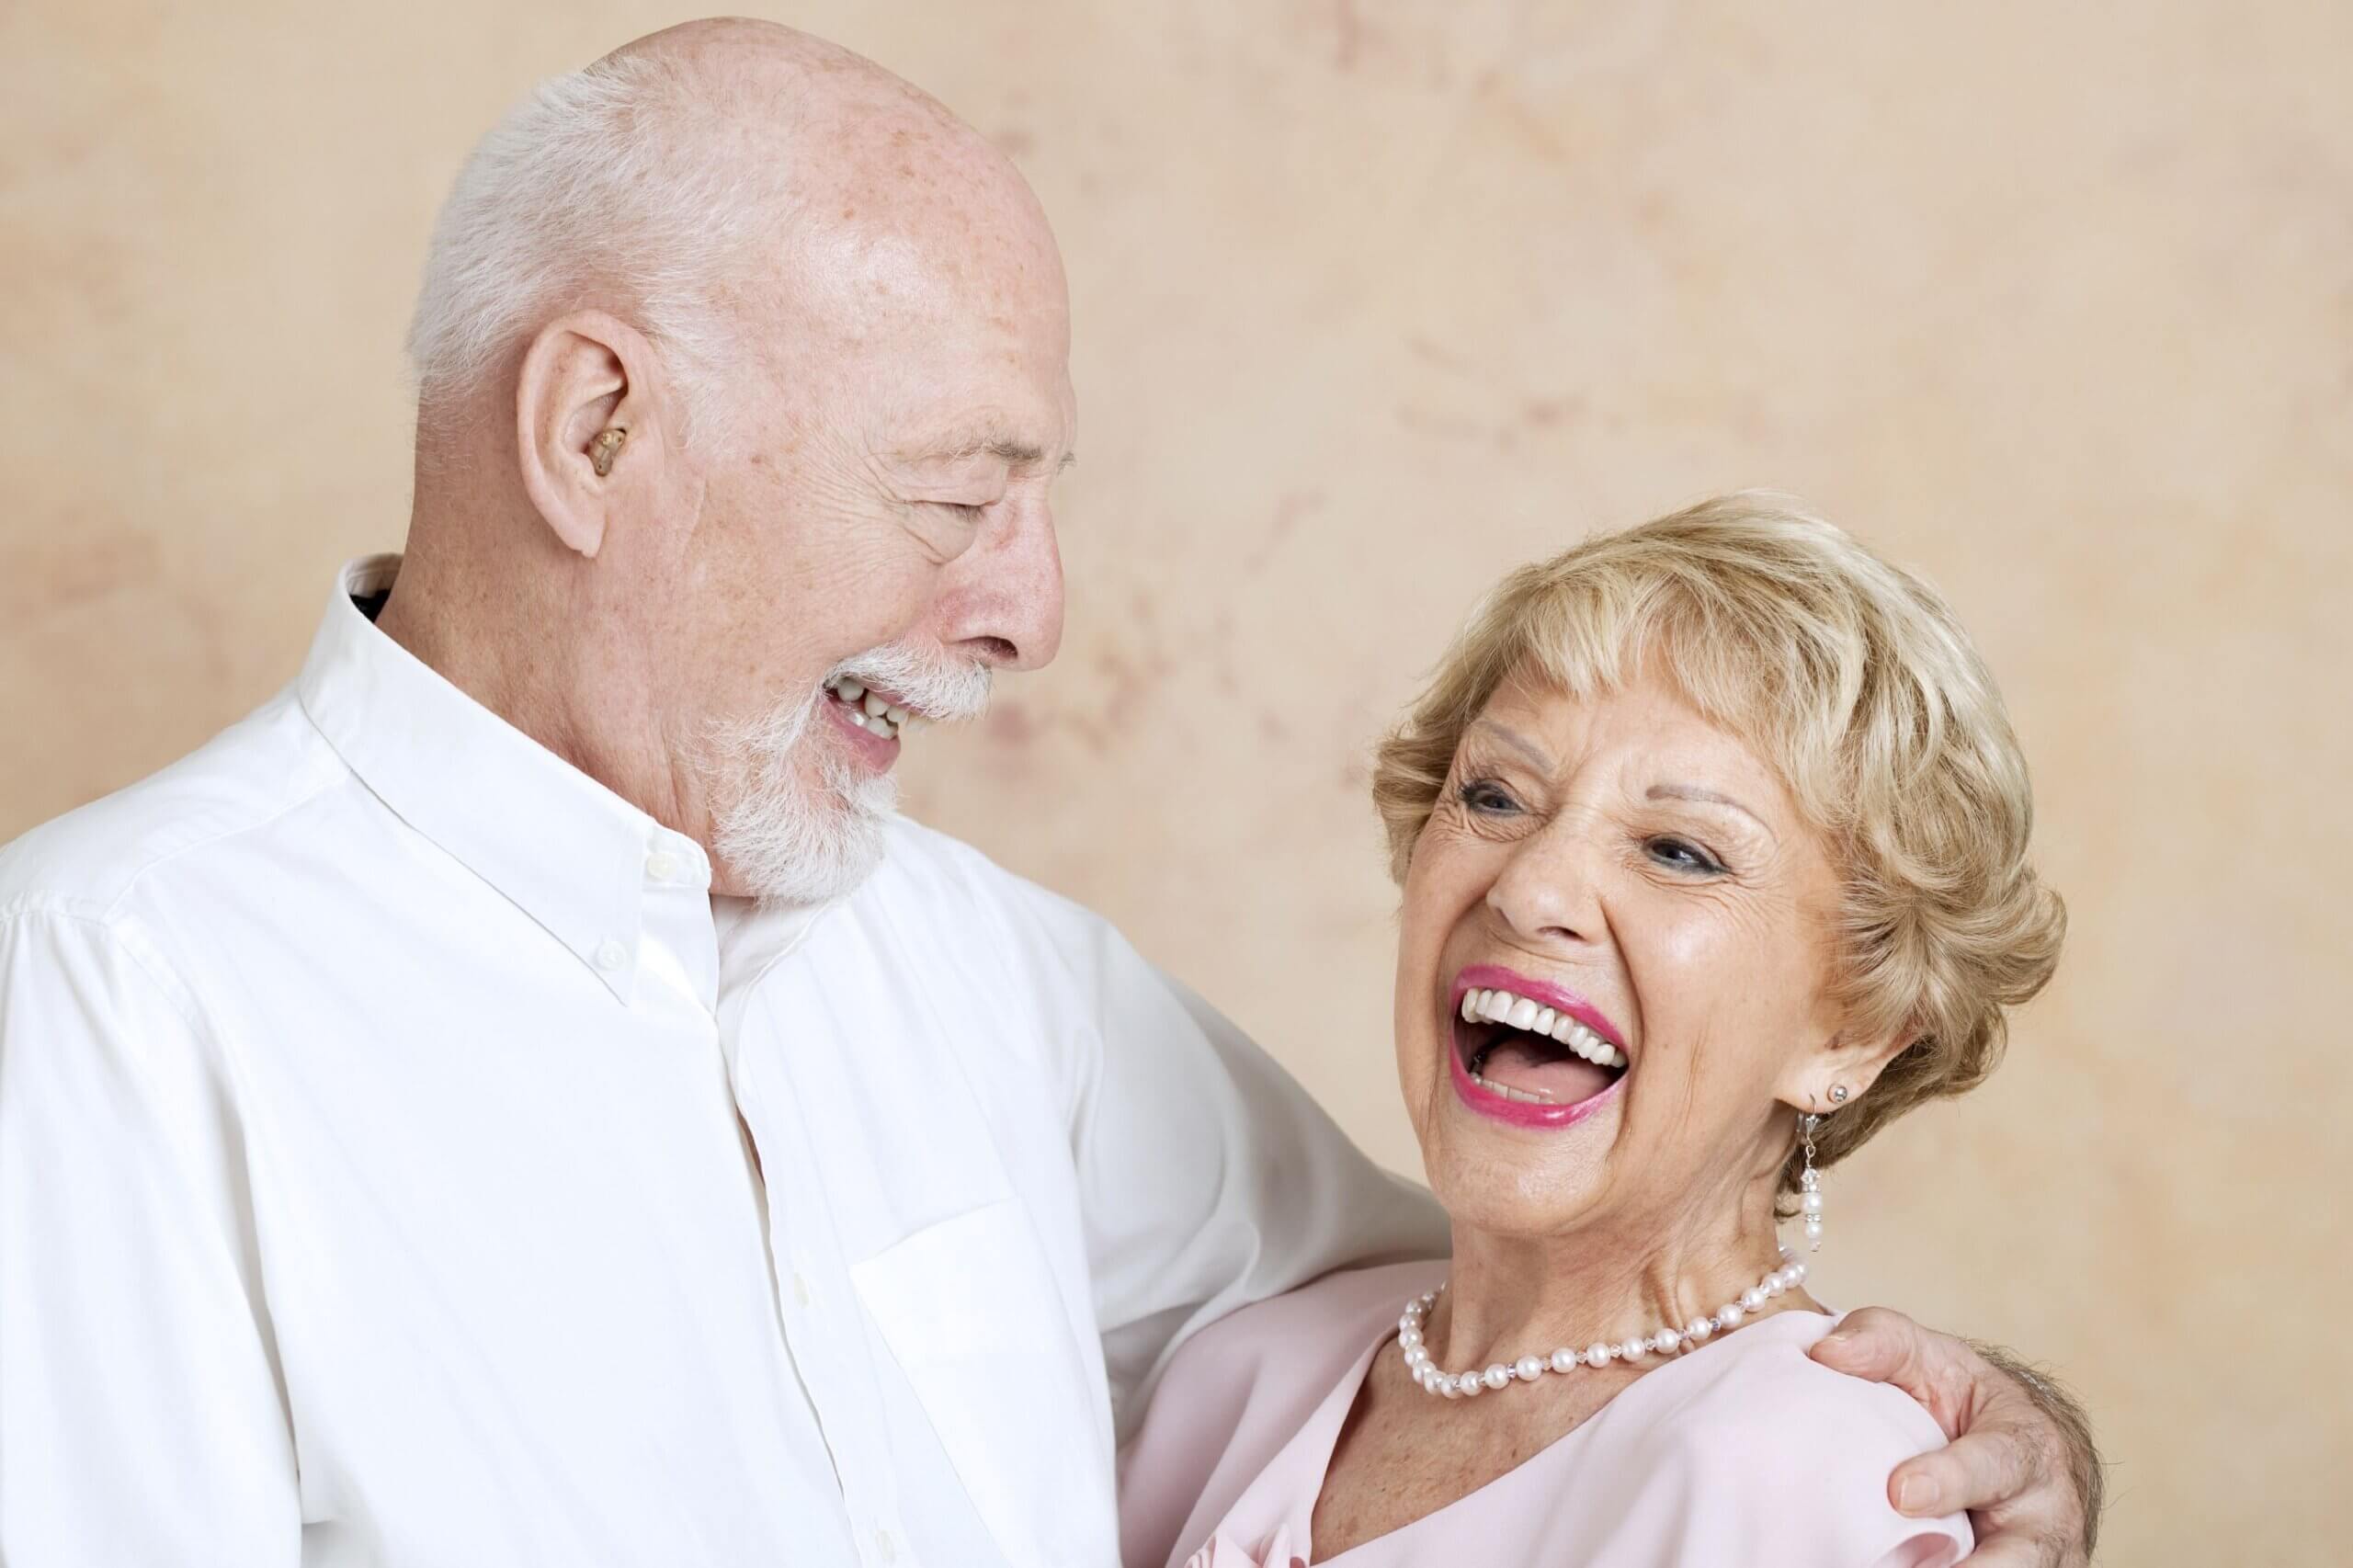 Old Couple Smiling and Laughing In Nice Dress Clothes